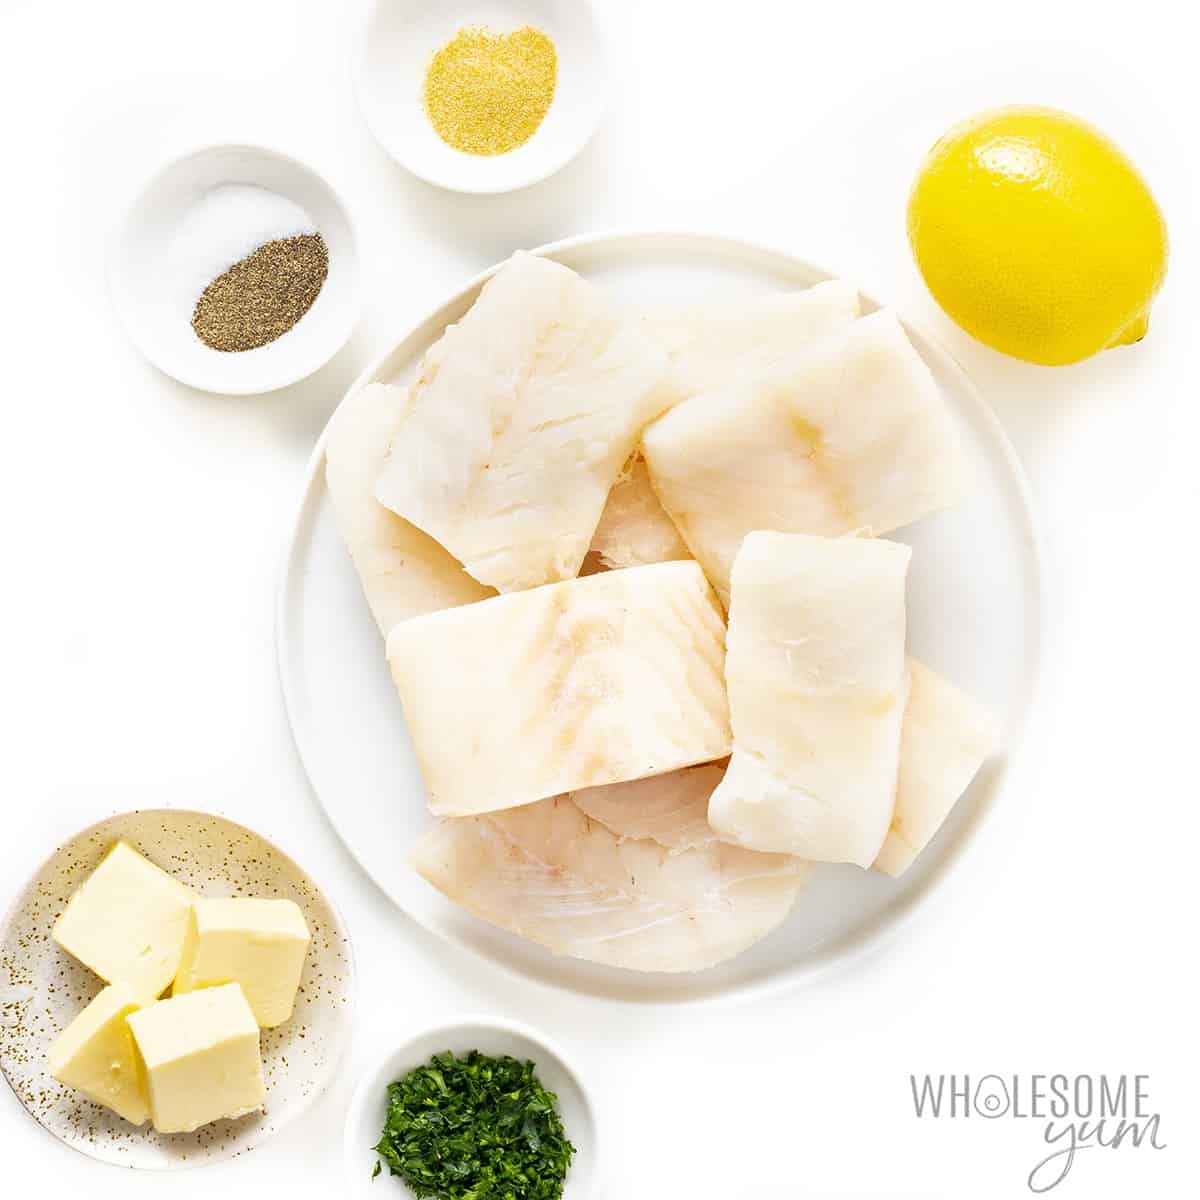 Baked cod recipe ingredients in bowls